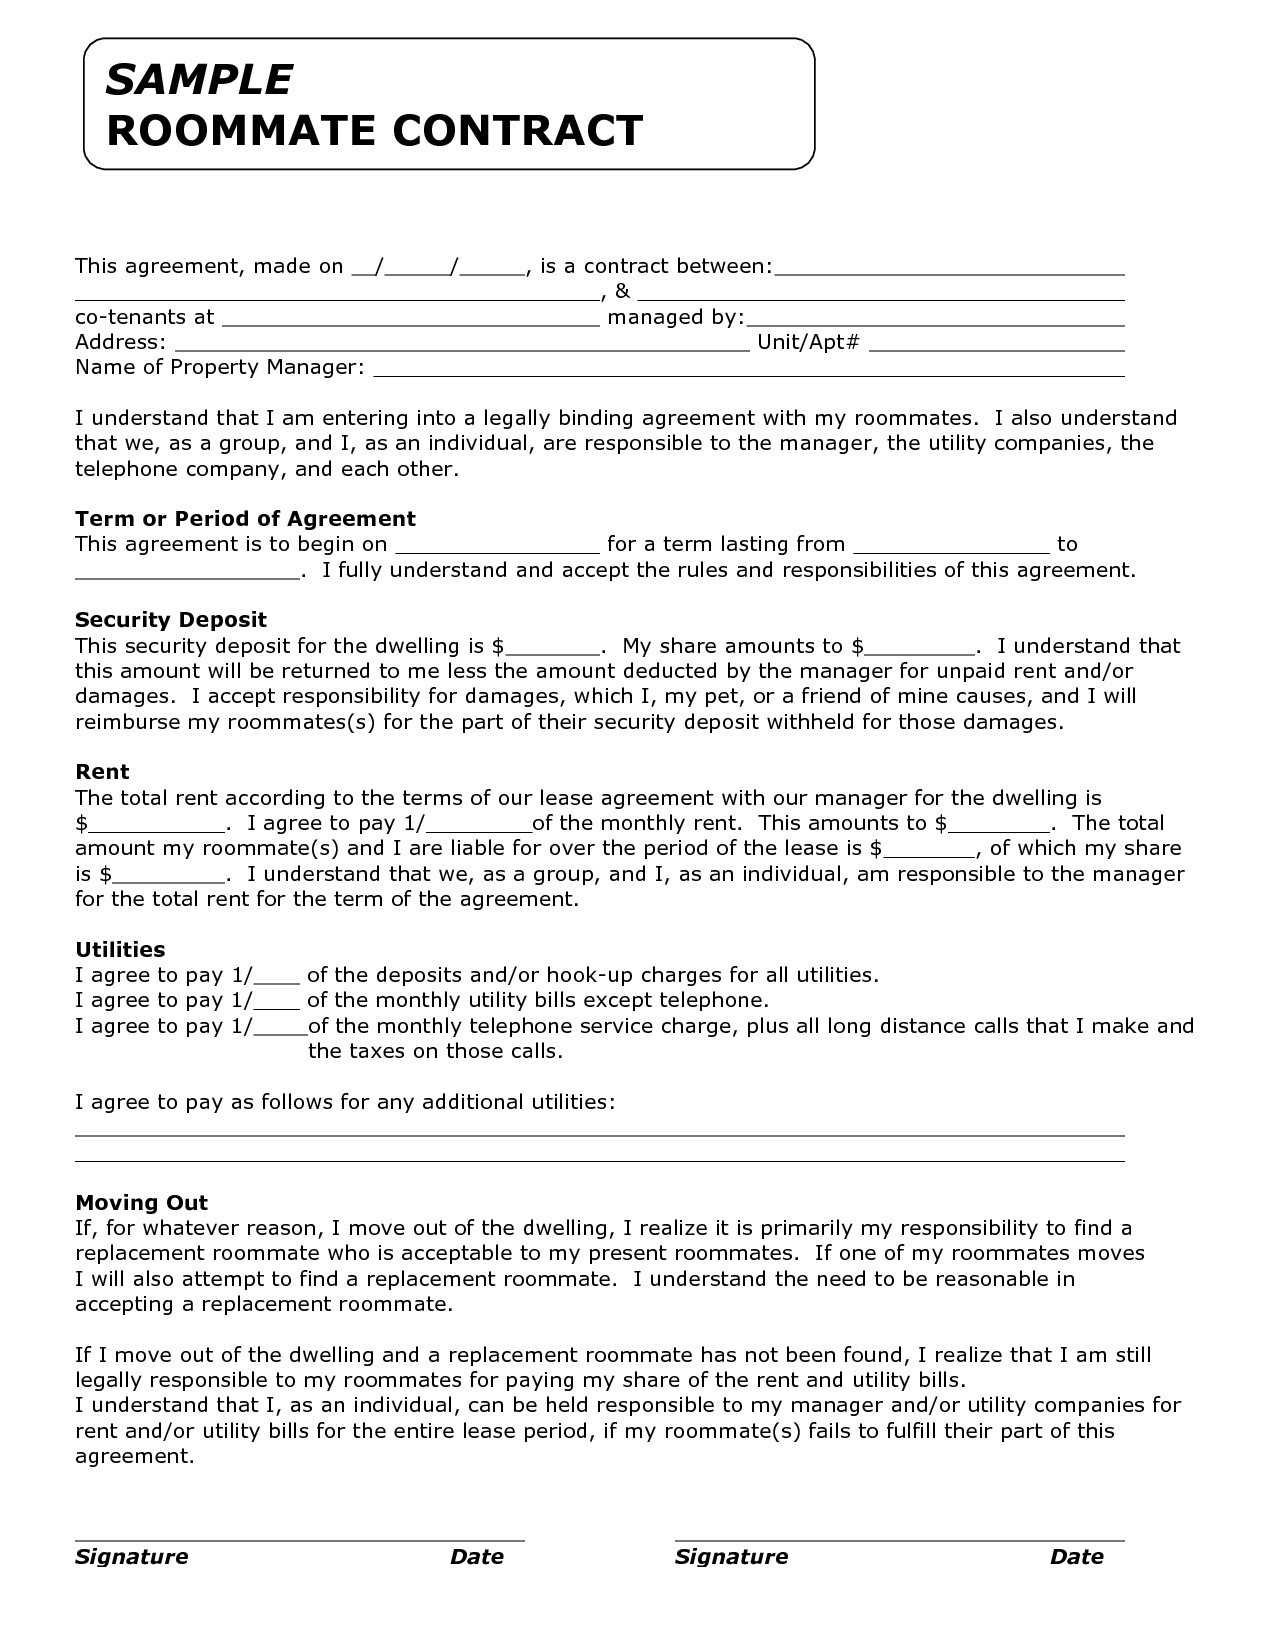 Health Worksheets Pdf together with 20 Unique Cms Claim form